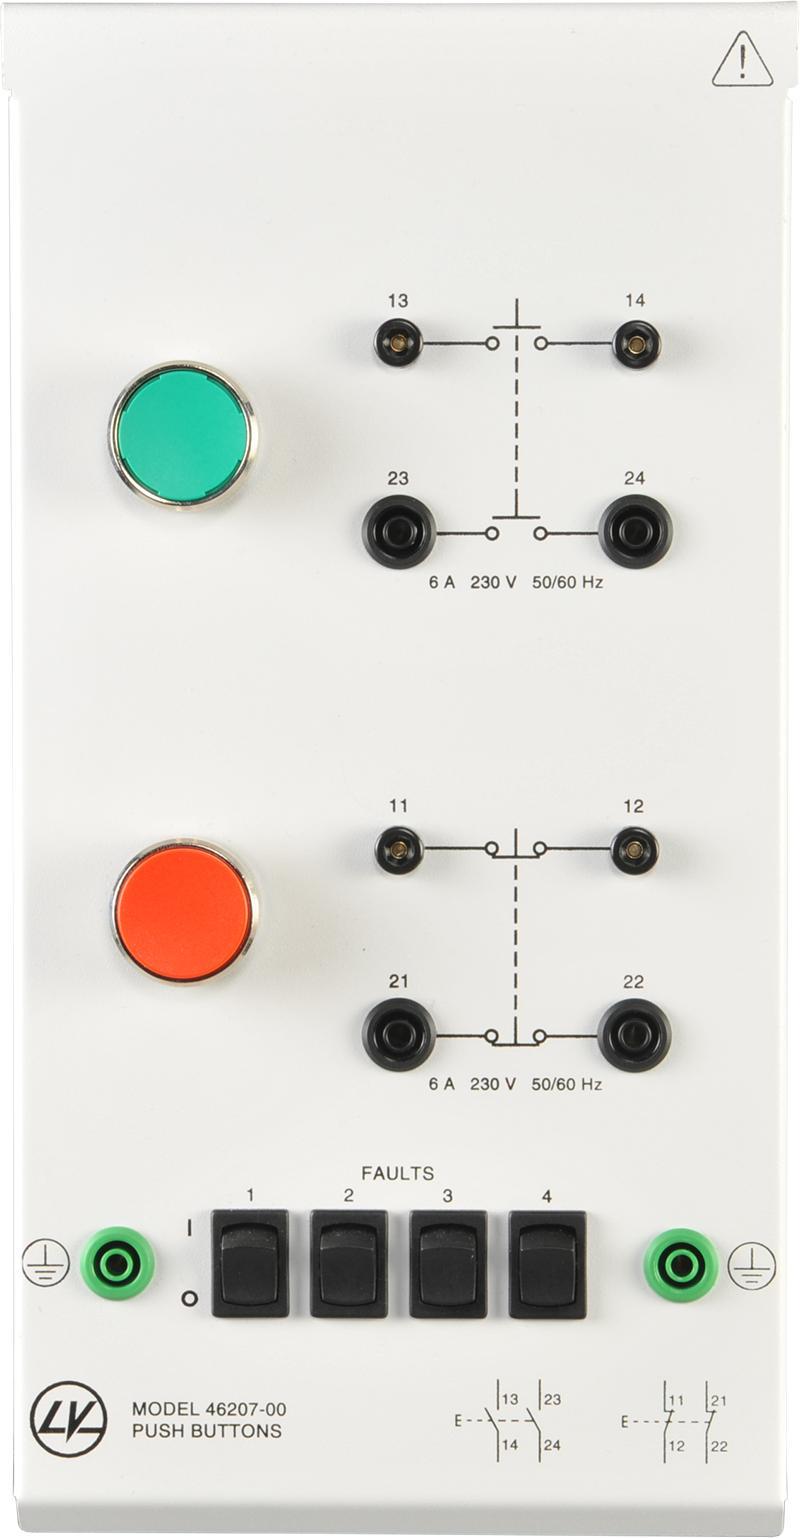 Push Buttons 46207-00 The Push Buttons module consists of two push-button switches, one green and one red.